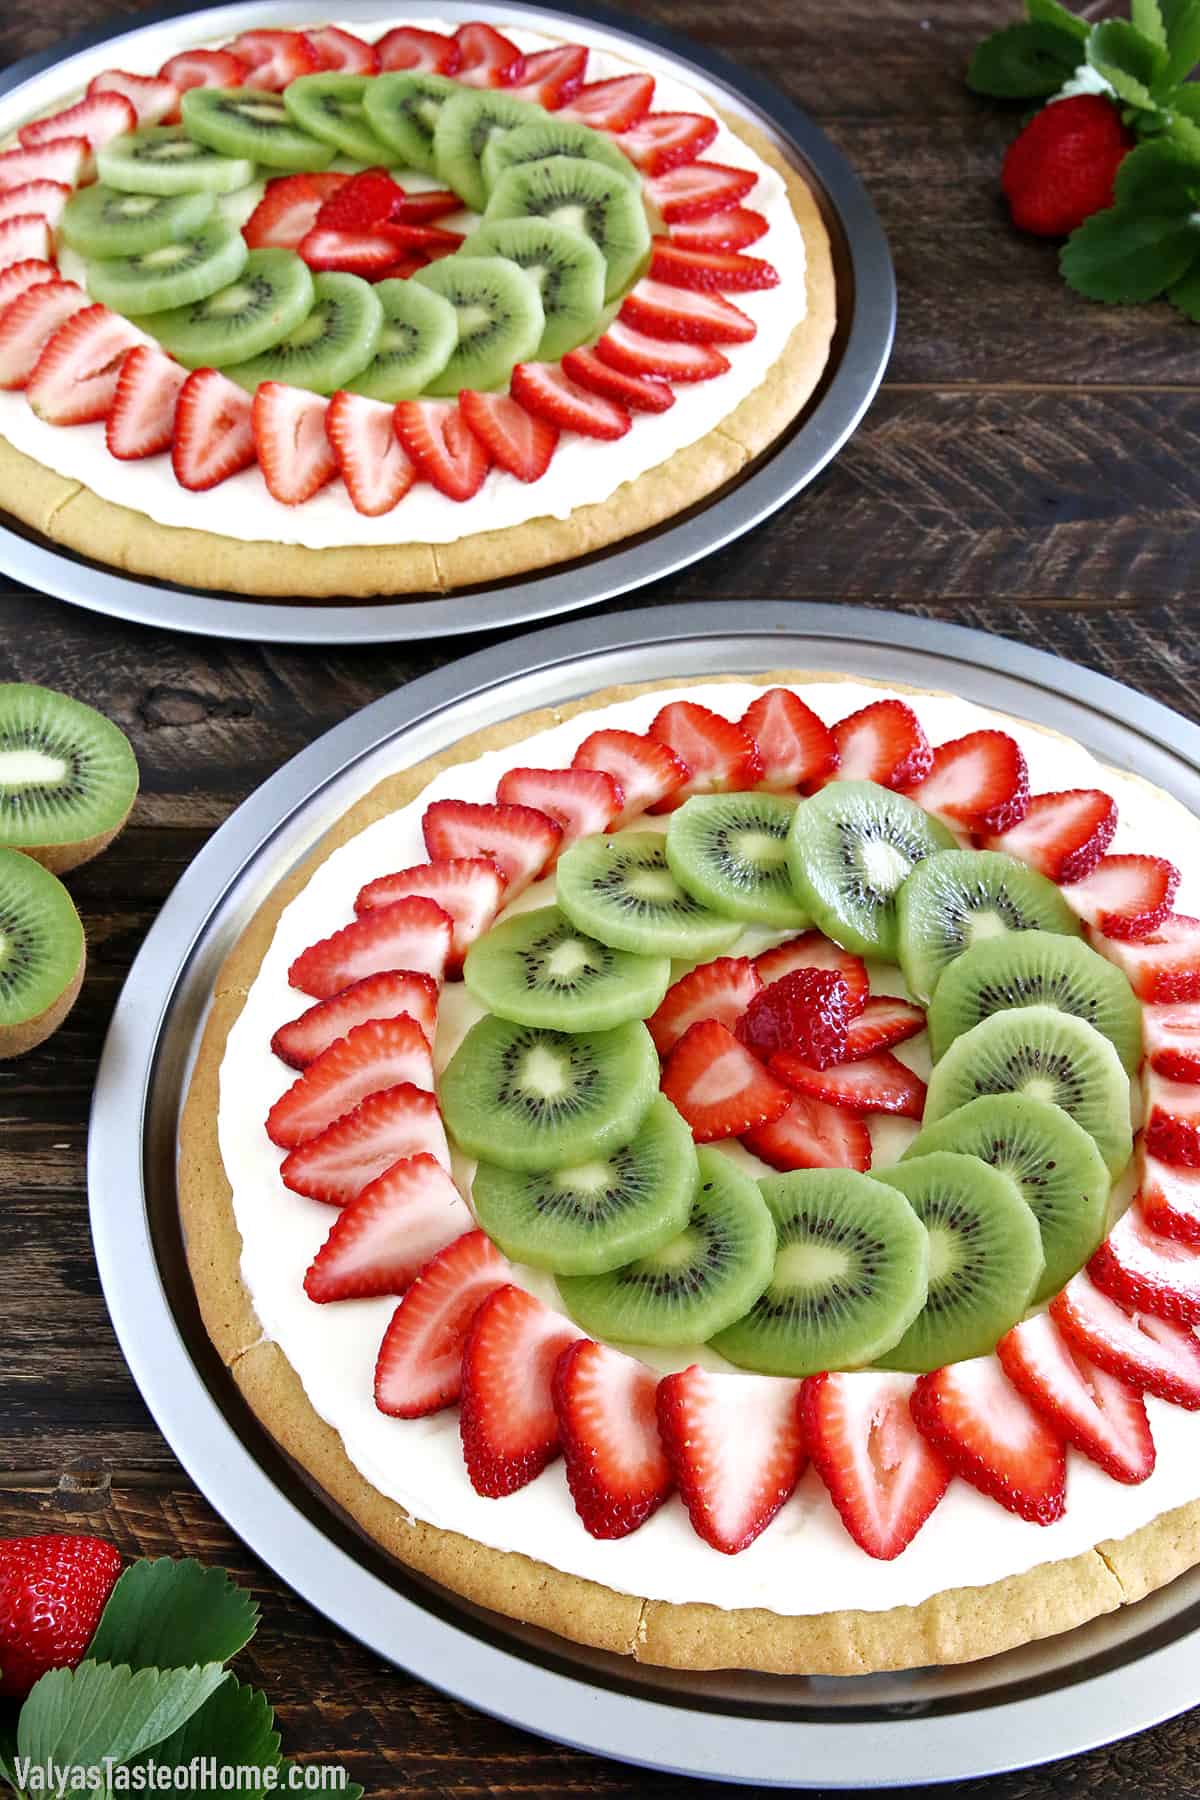 My recipe features a delicious combination of strawberries and kiwis on a cream cheese dessert pizza ‘sauce’ for the perfect balance of flavors. It’s my family’s favorite flavor combination and I’m sure you’re going to fall in love with it.